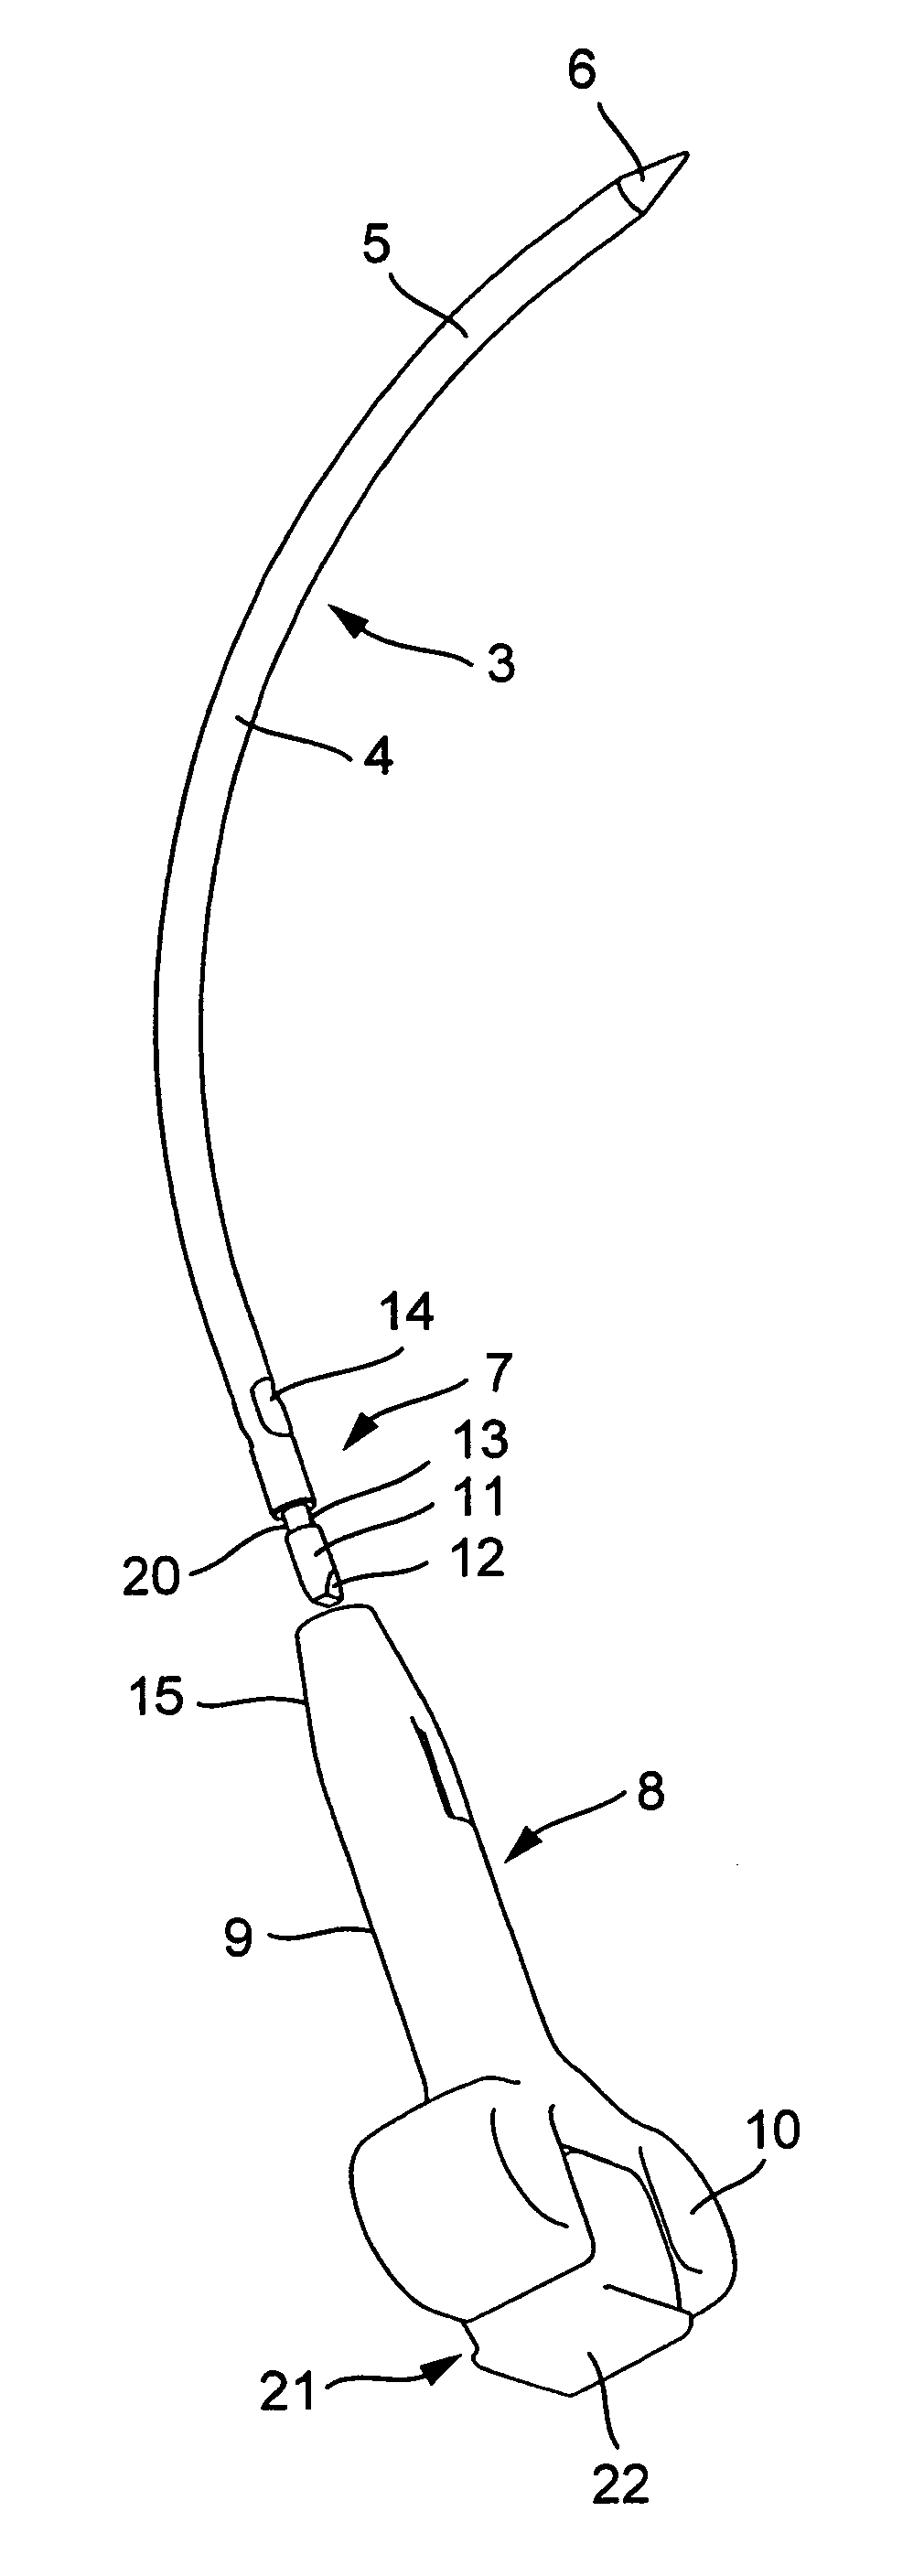 Incontinence strip for treating urinary incontinence